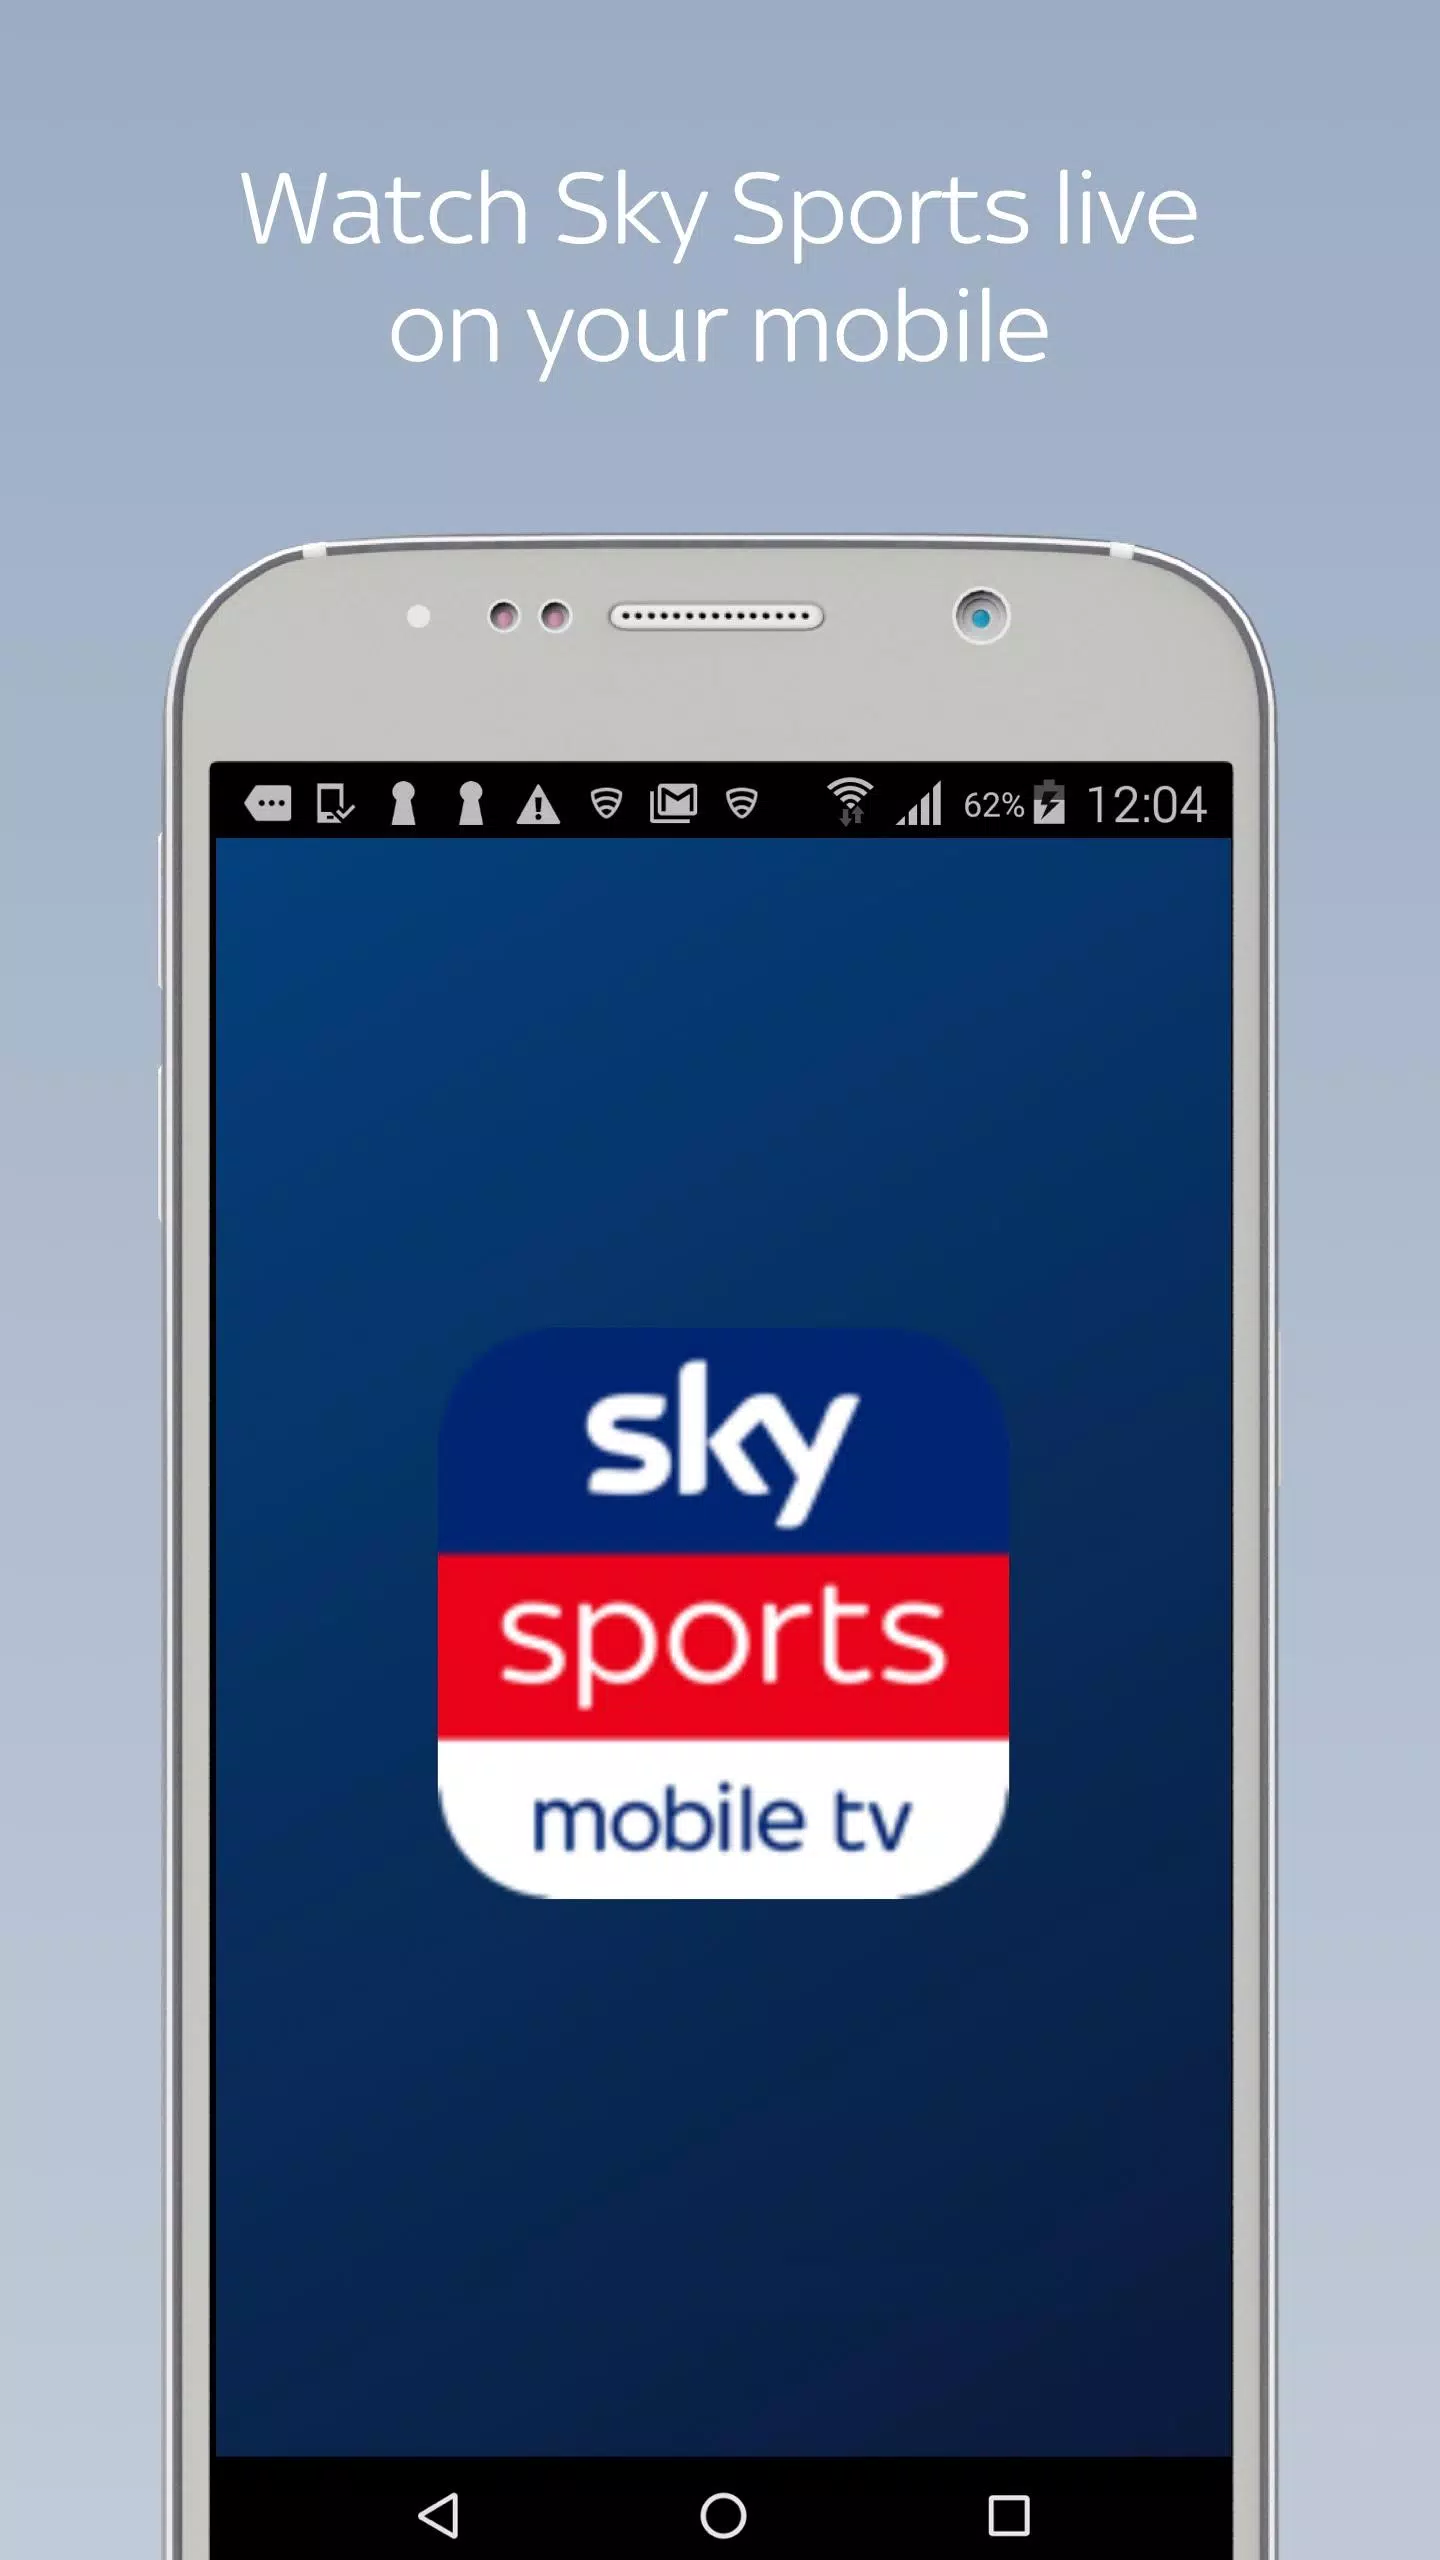 Championship football live: How to watch games live on Sky Sports